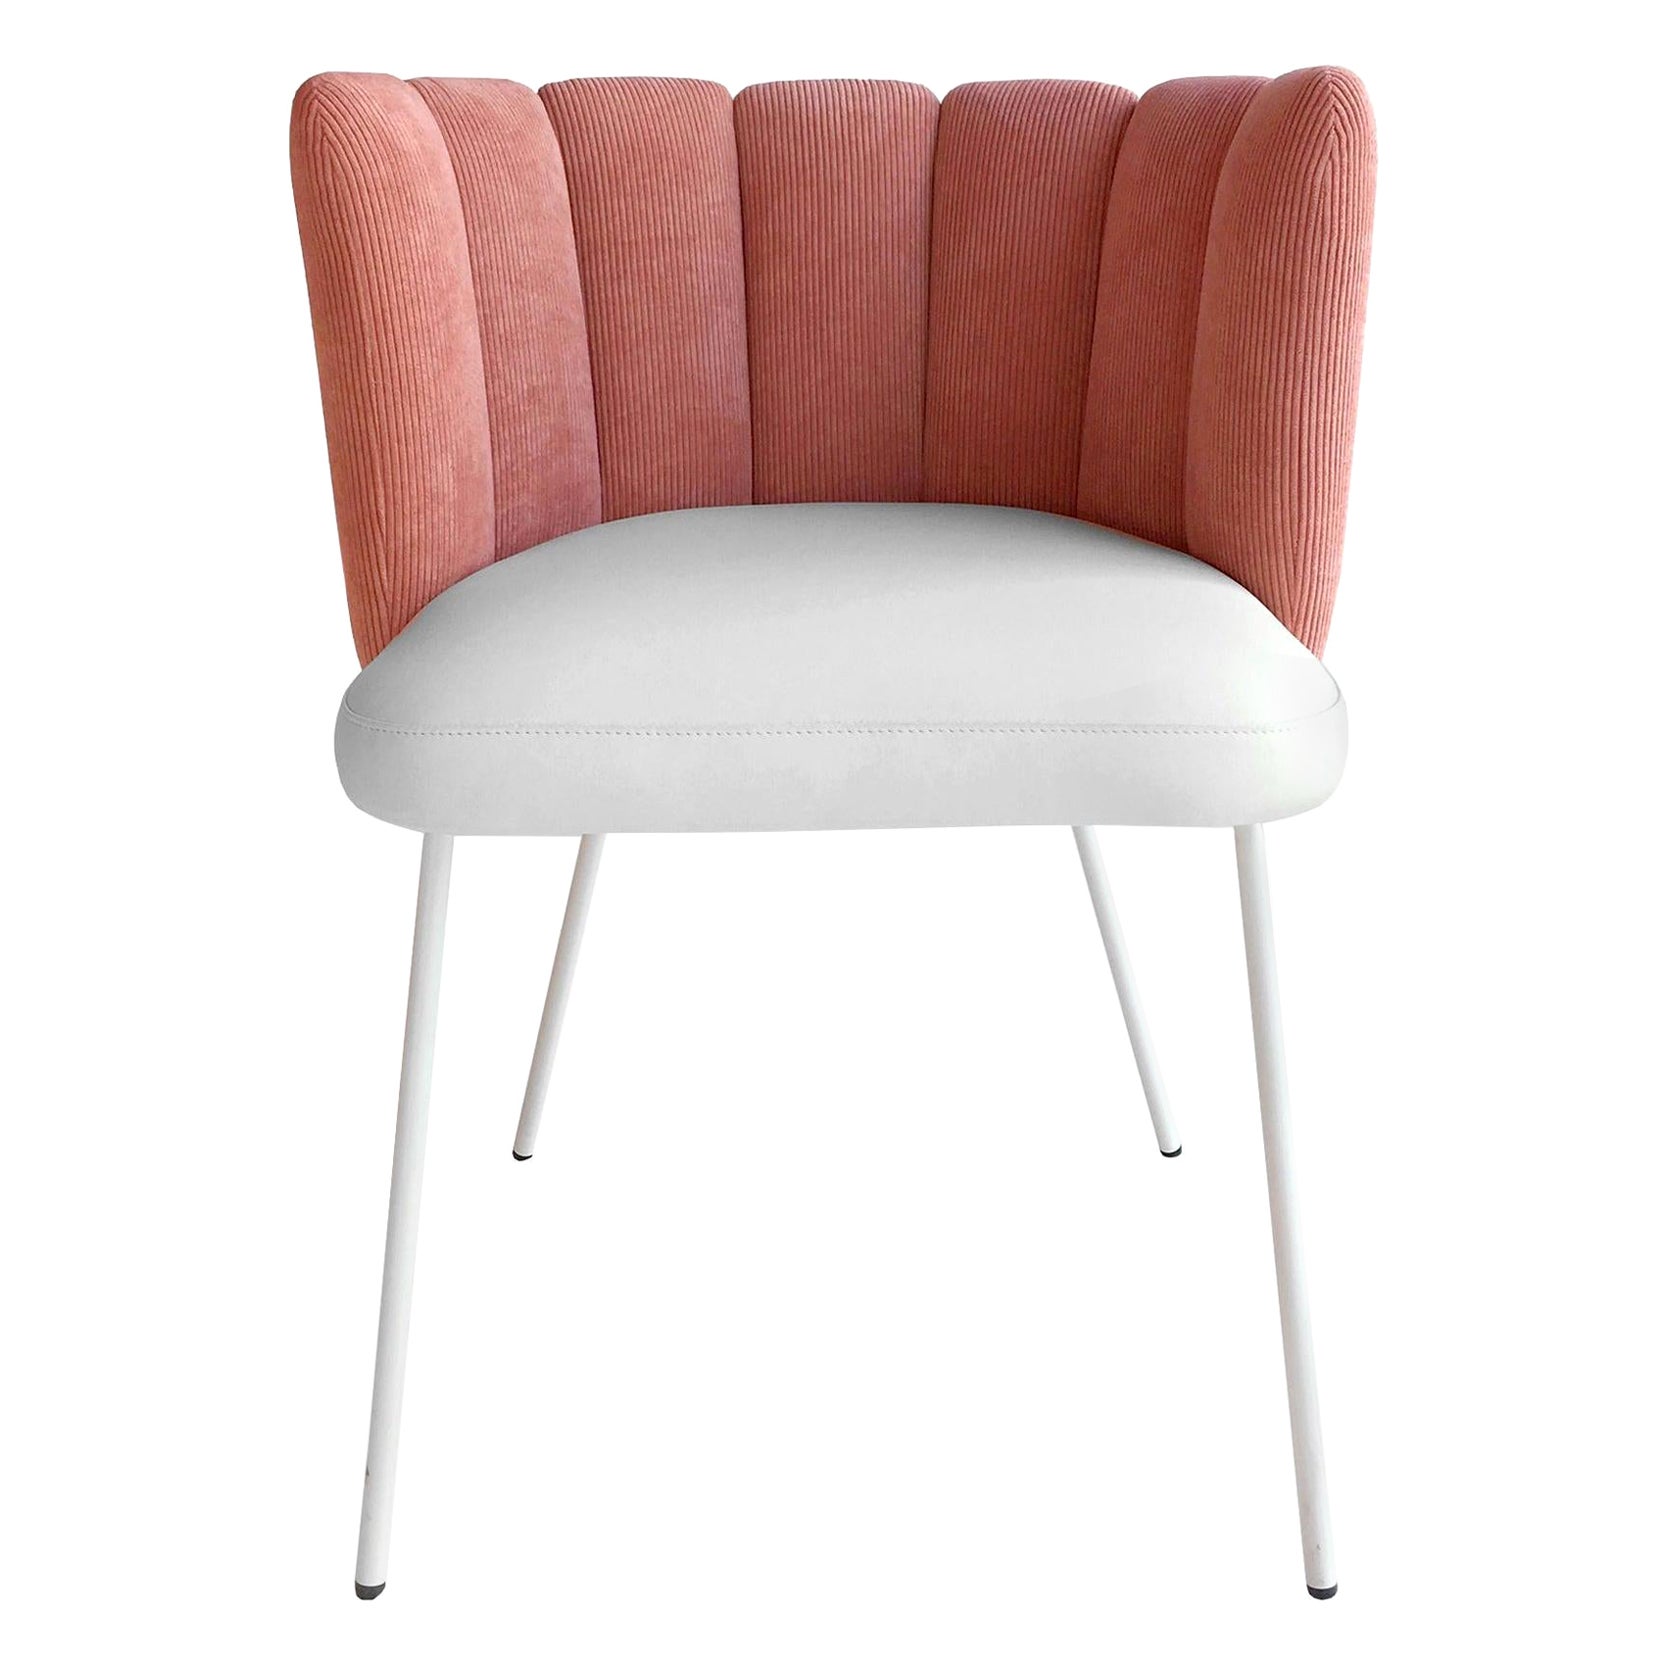 Pink and White Velvet Armchair by Monica Armani